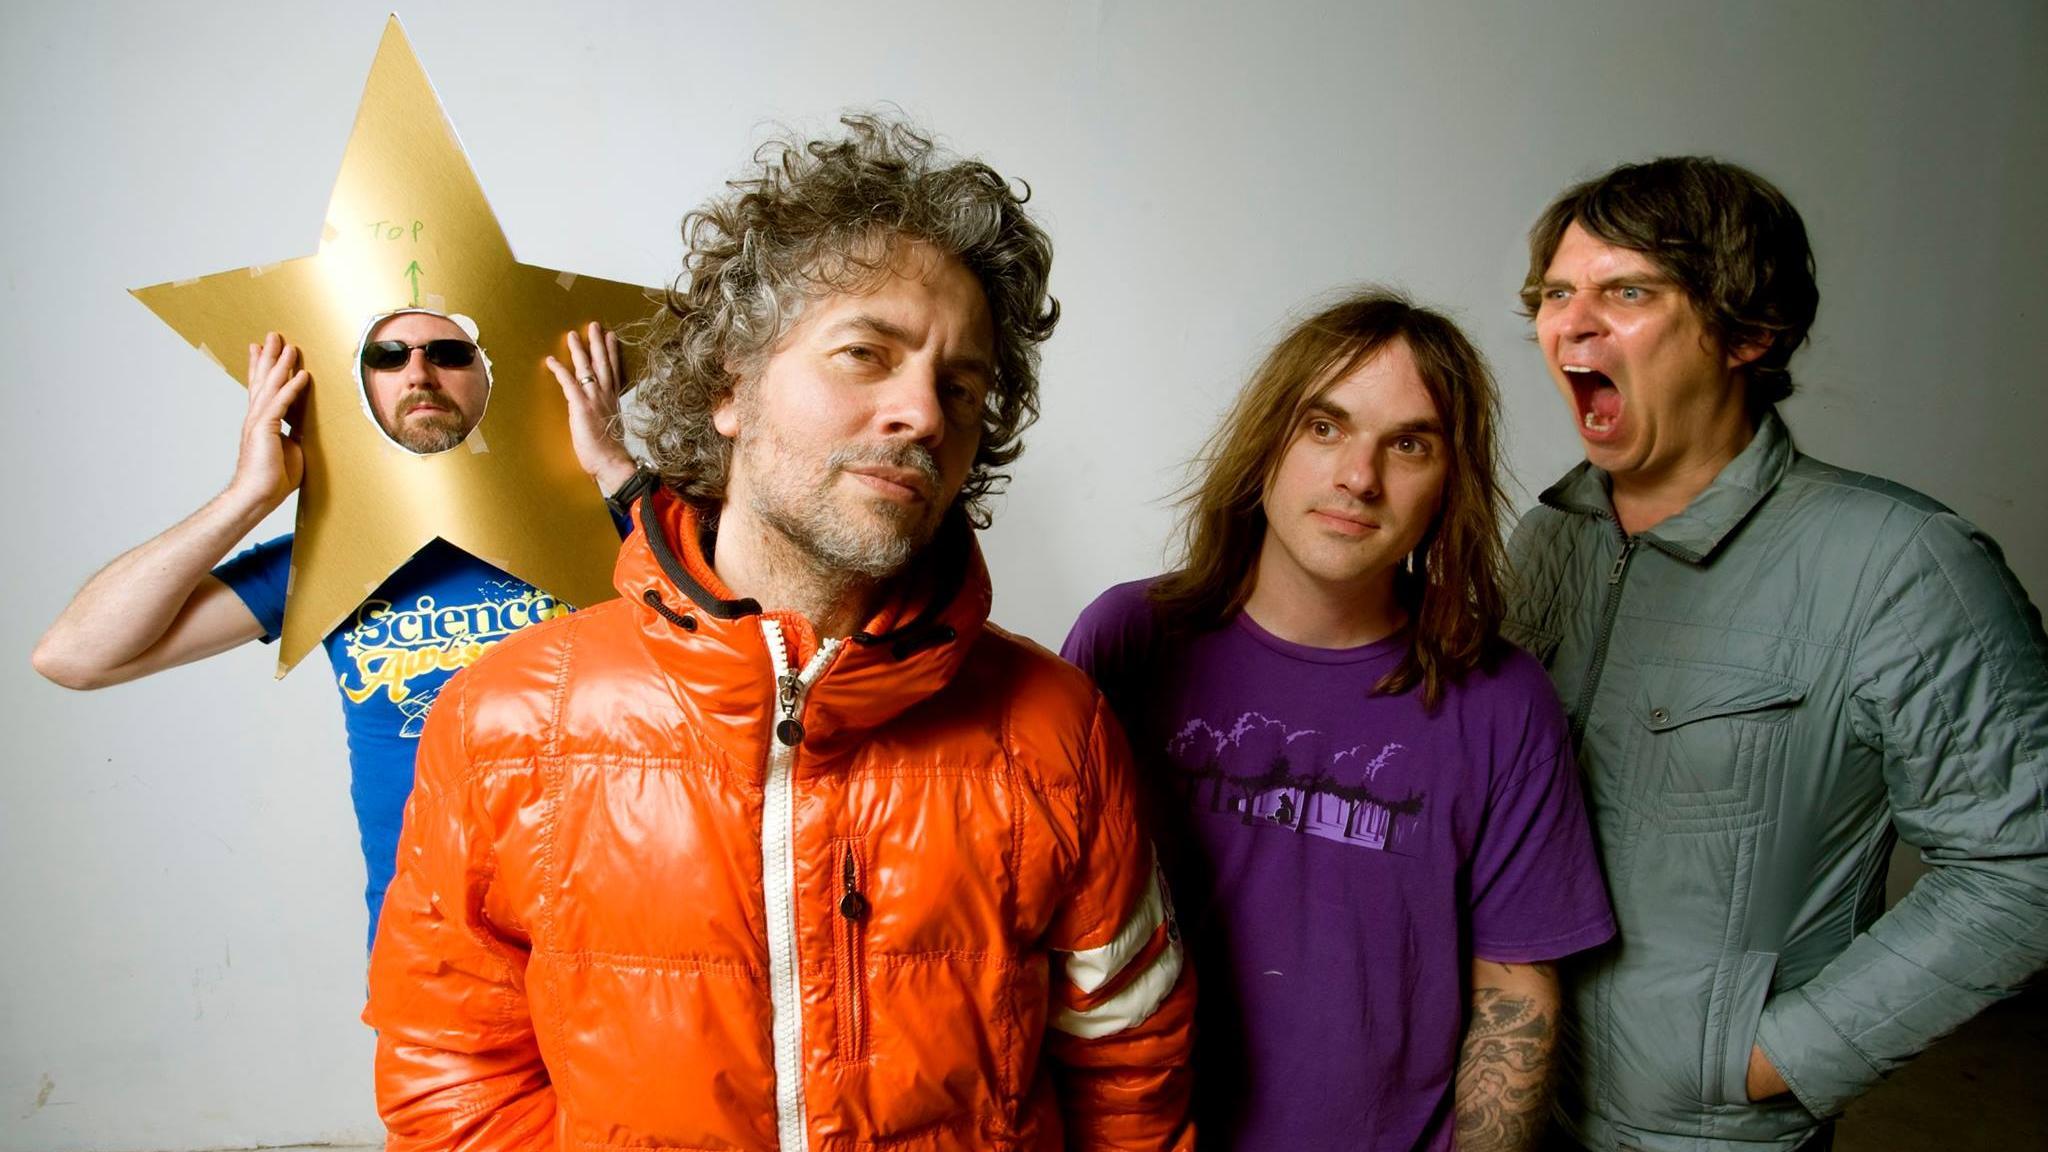 Flaming Lips Wallpapers